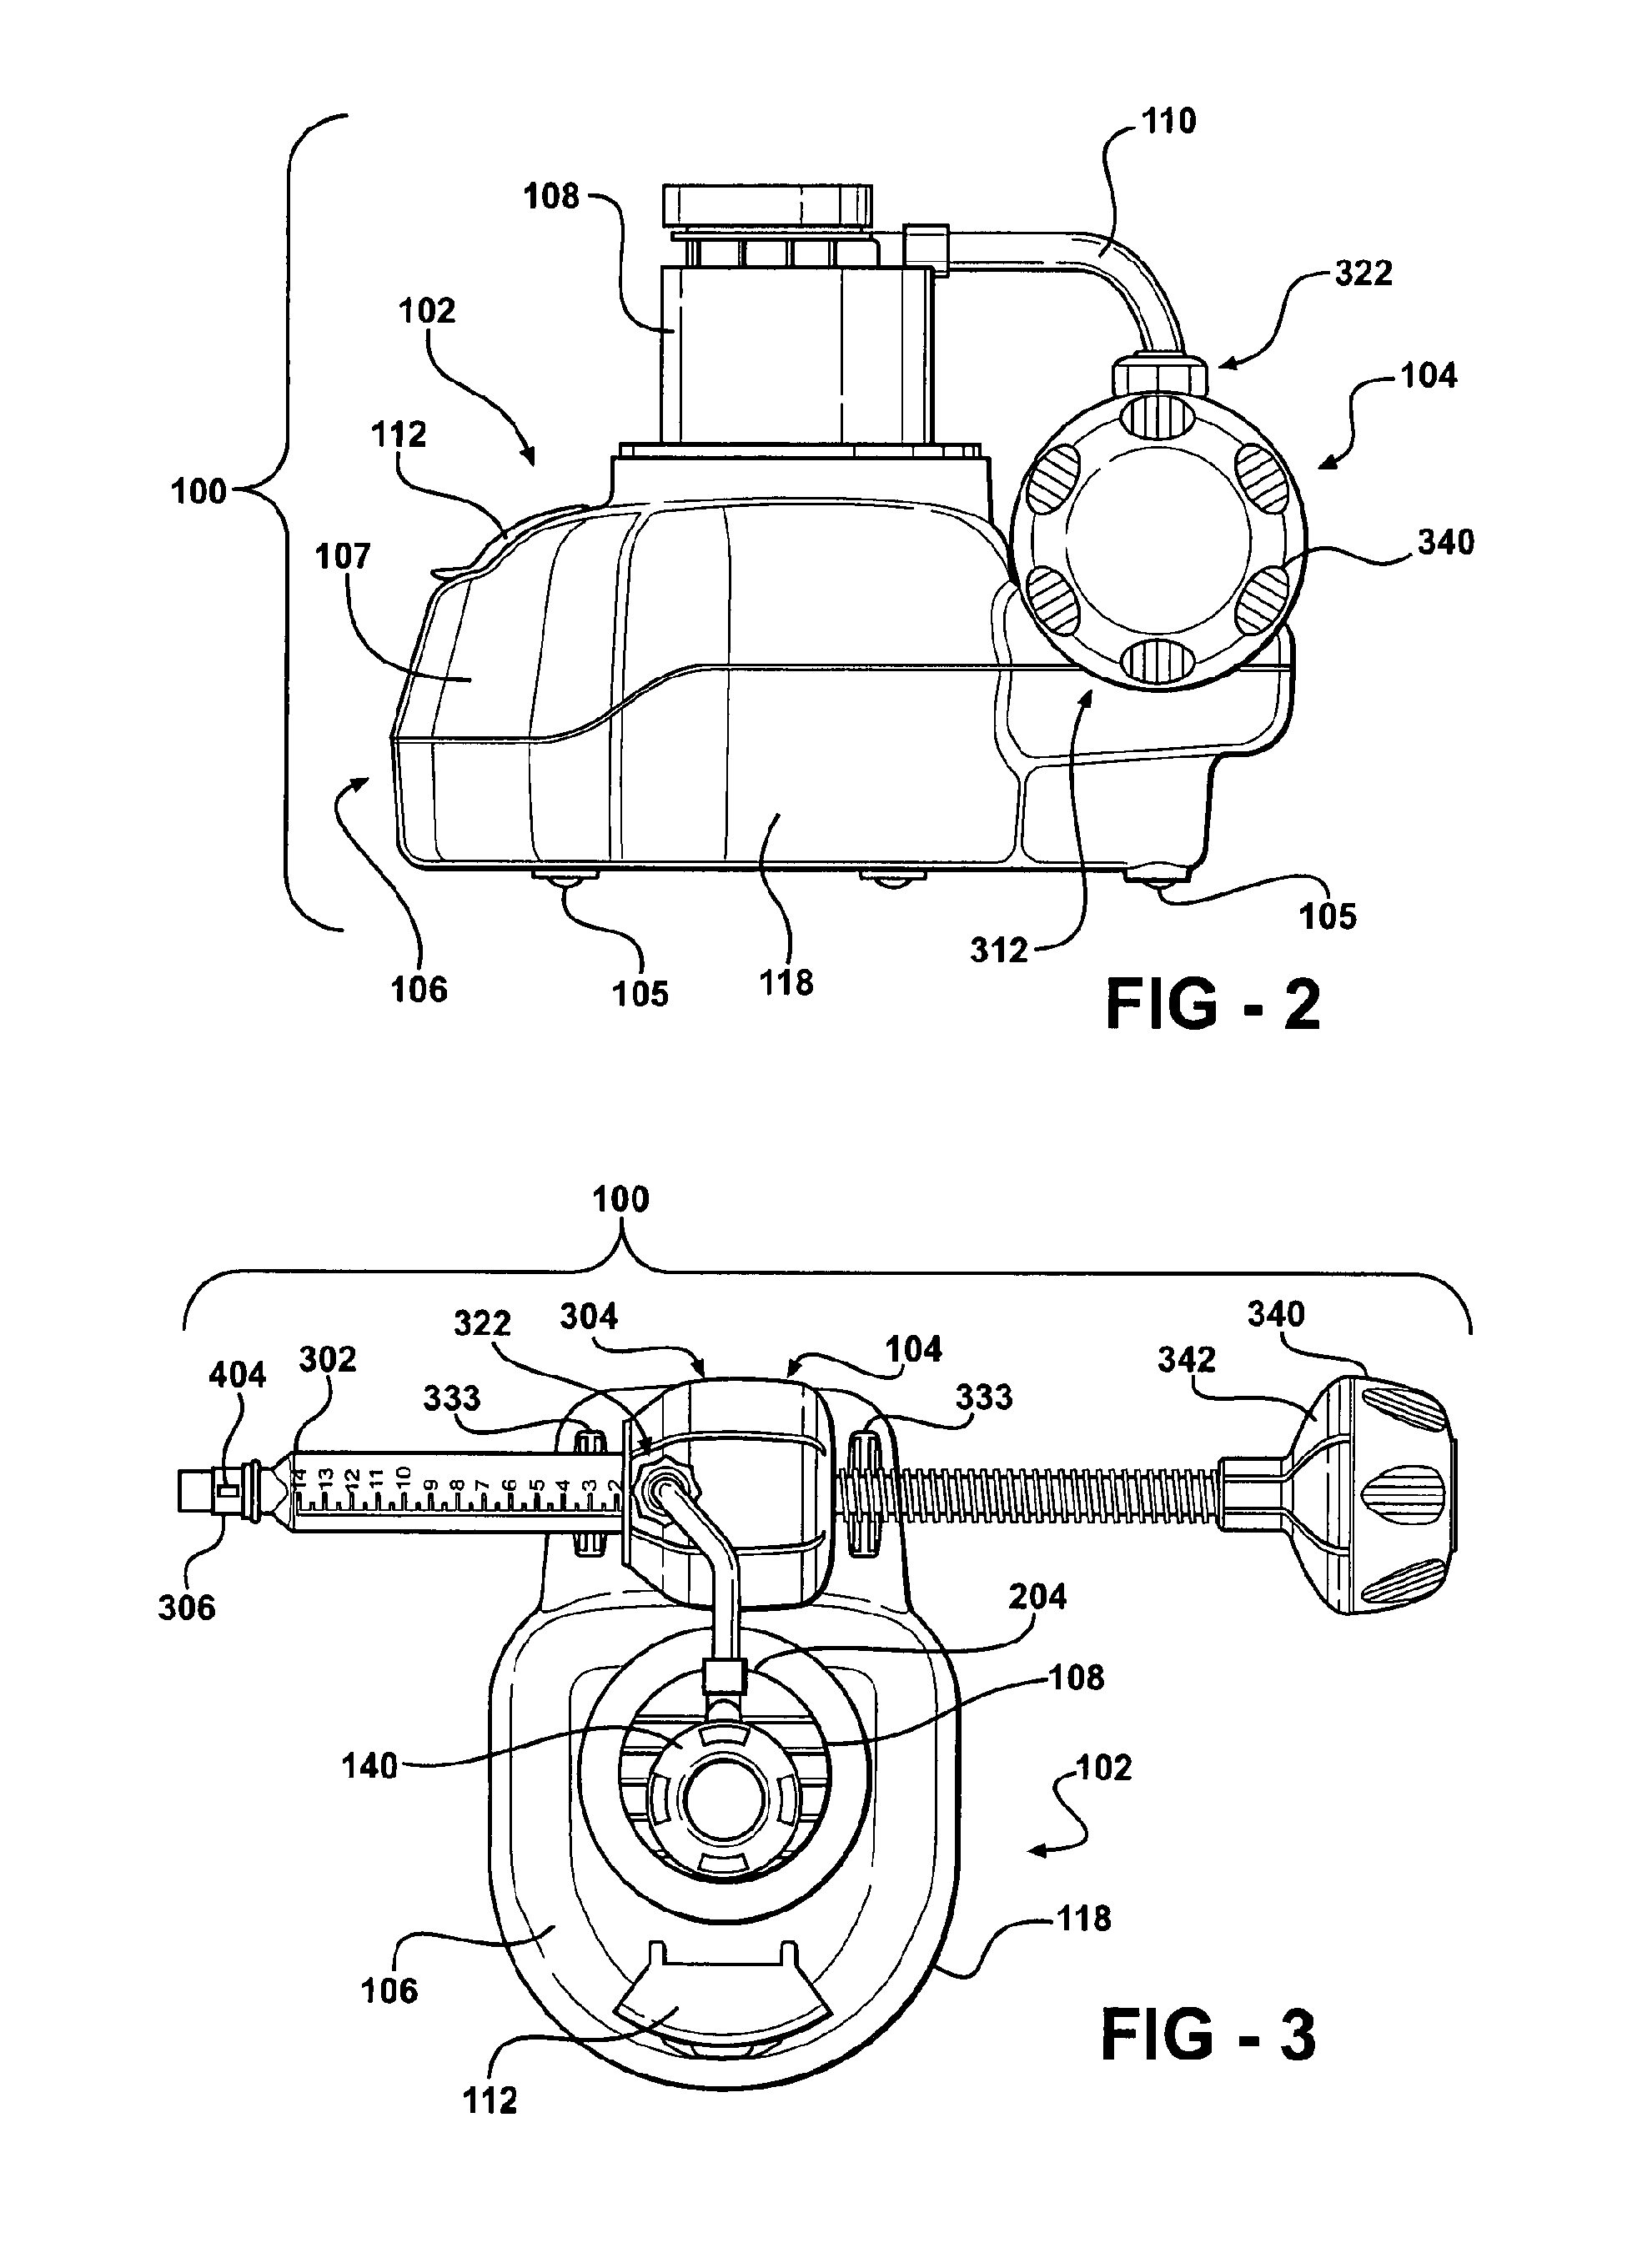 Bone cement mixing and delivery system with automated bone cement transfer between mixer and delivery device